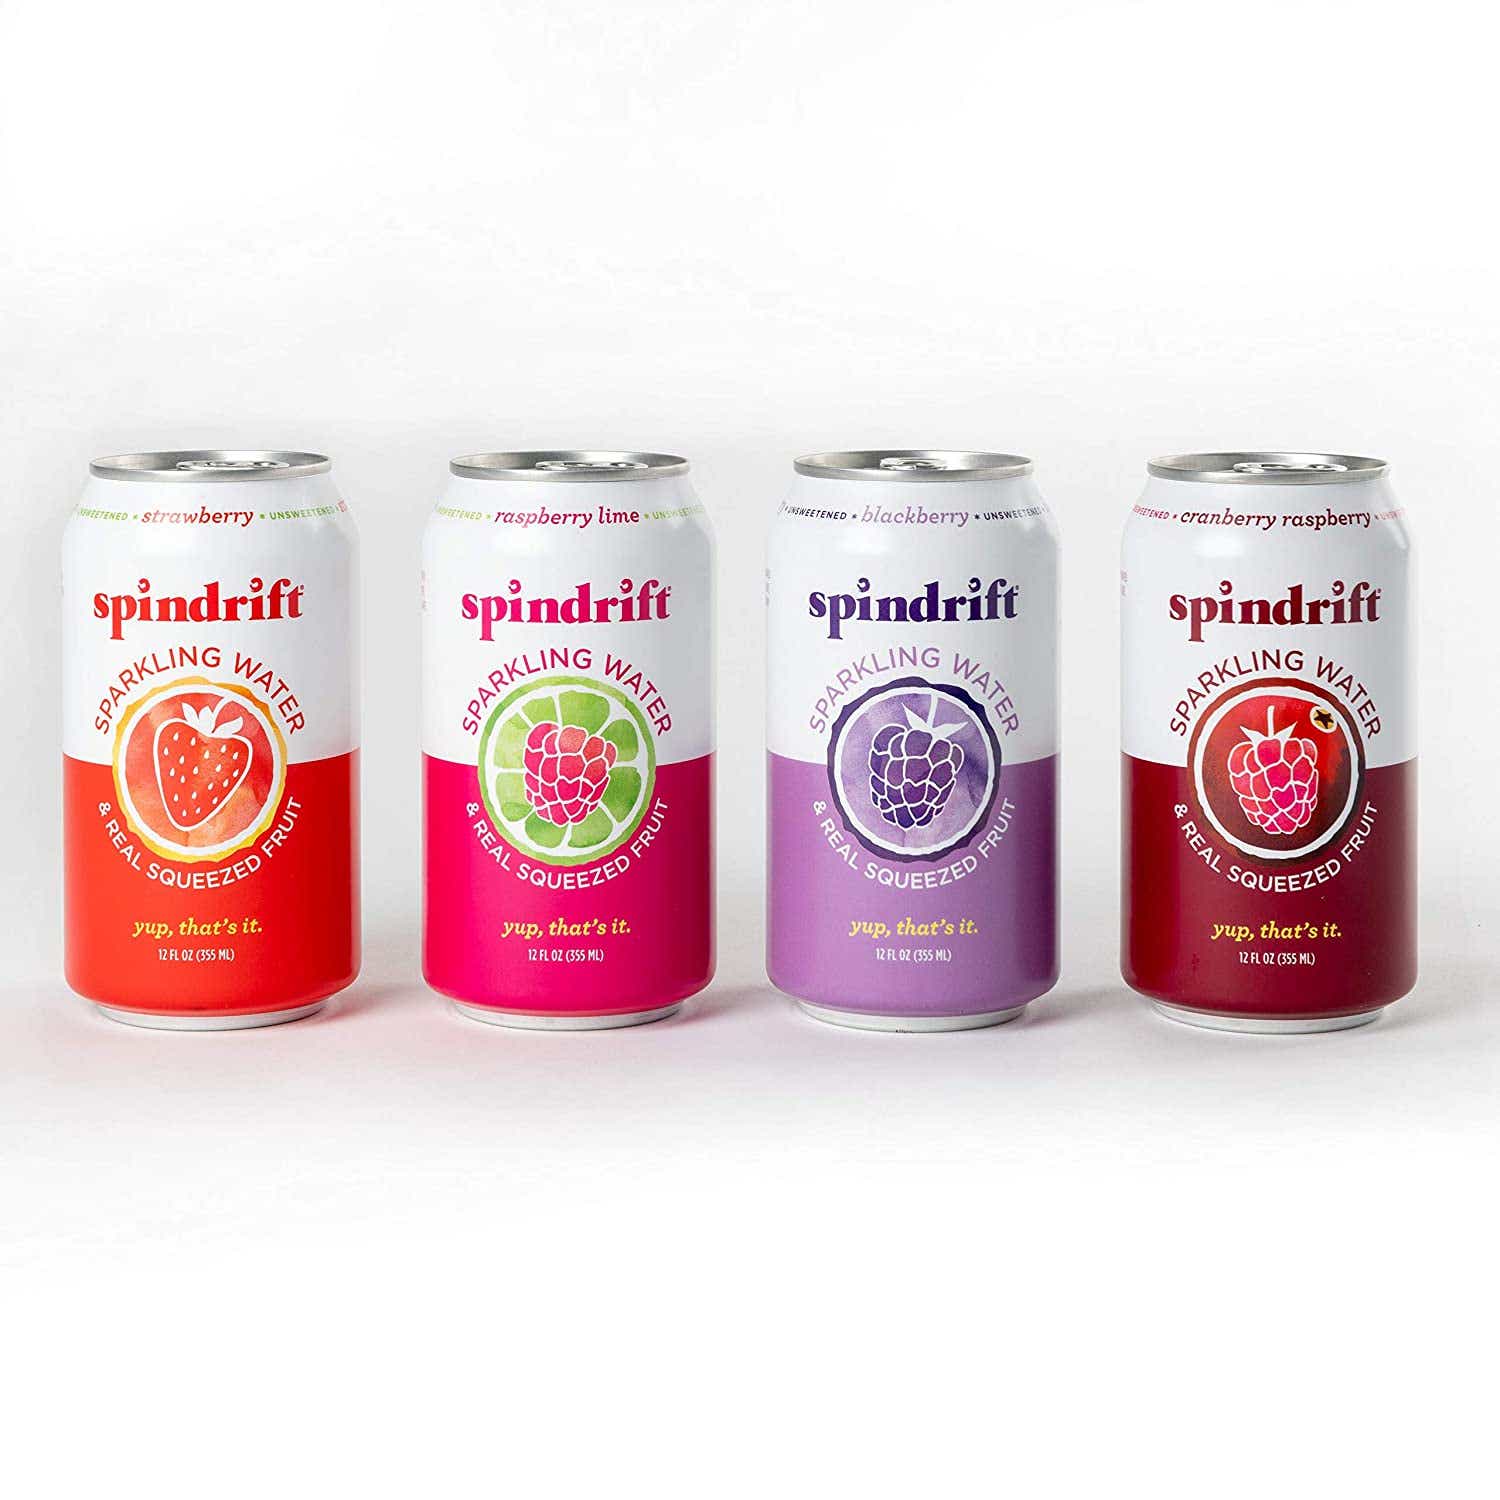 Spindrift flavored sparkling water